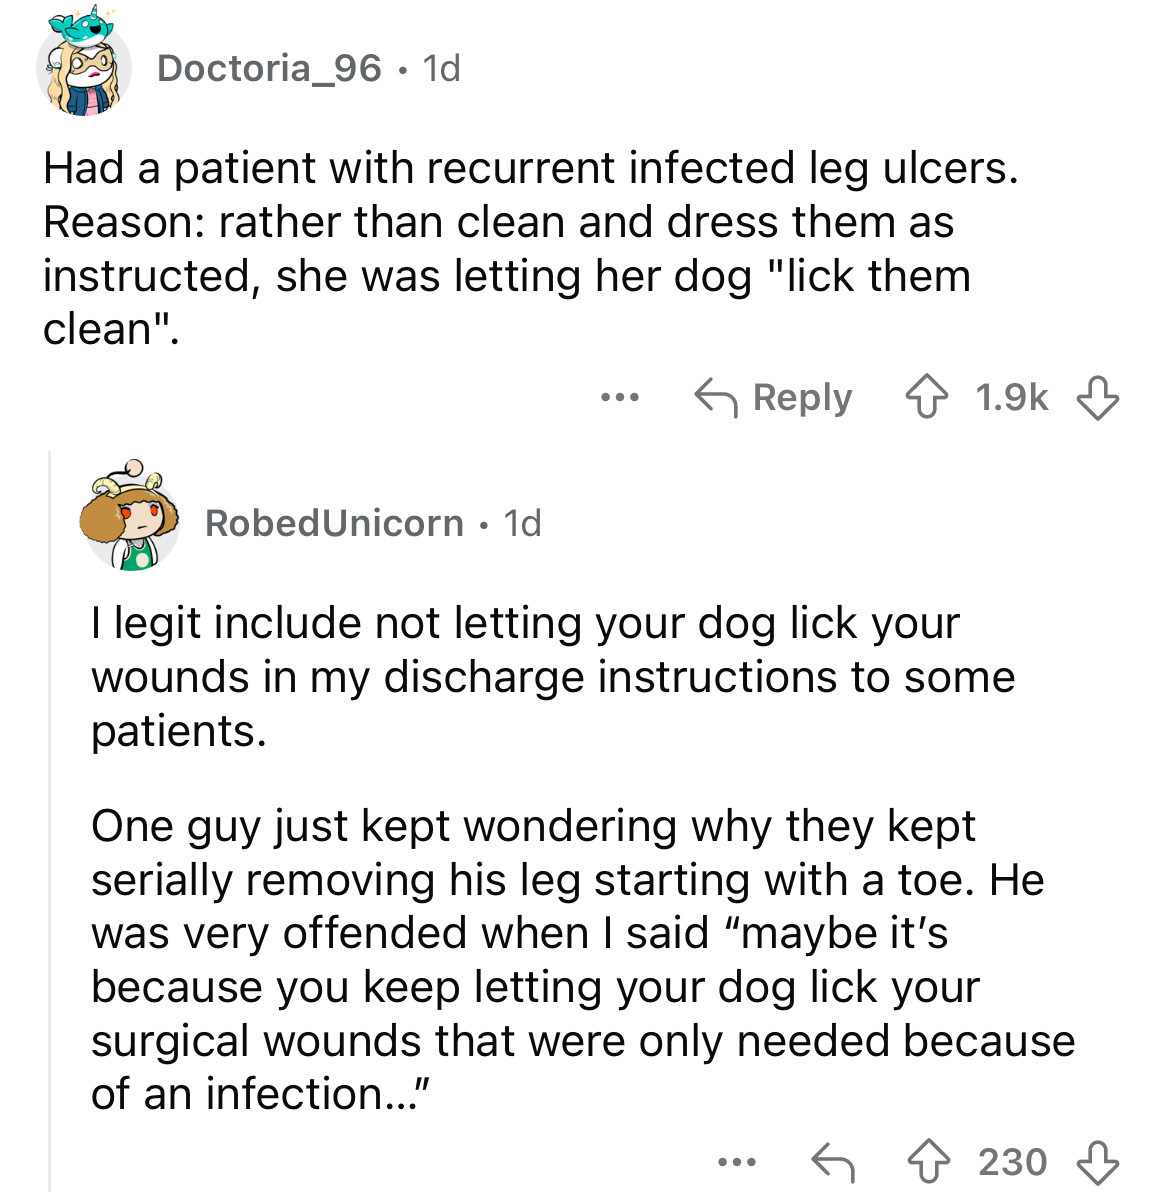 document - Doctoria_96 1d . Had a patient with recurrent infected leg ulcers. Reason rather than clean and dress them as instructed, she was letting her dog "lick them clean". ... Robed Unicorn 1d . I legit include not letting your dog lick your wounds in